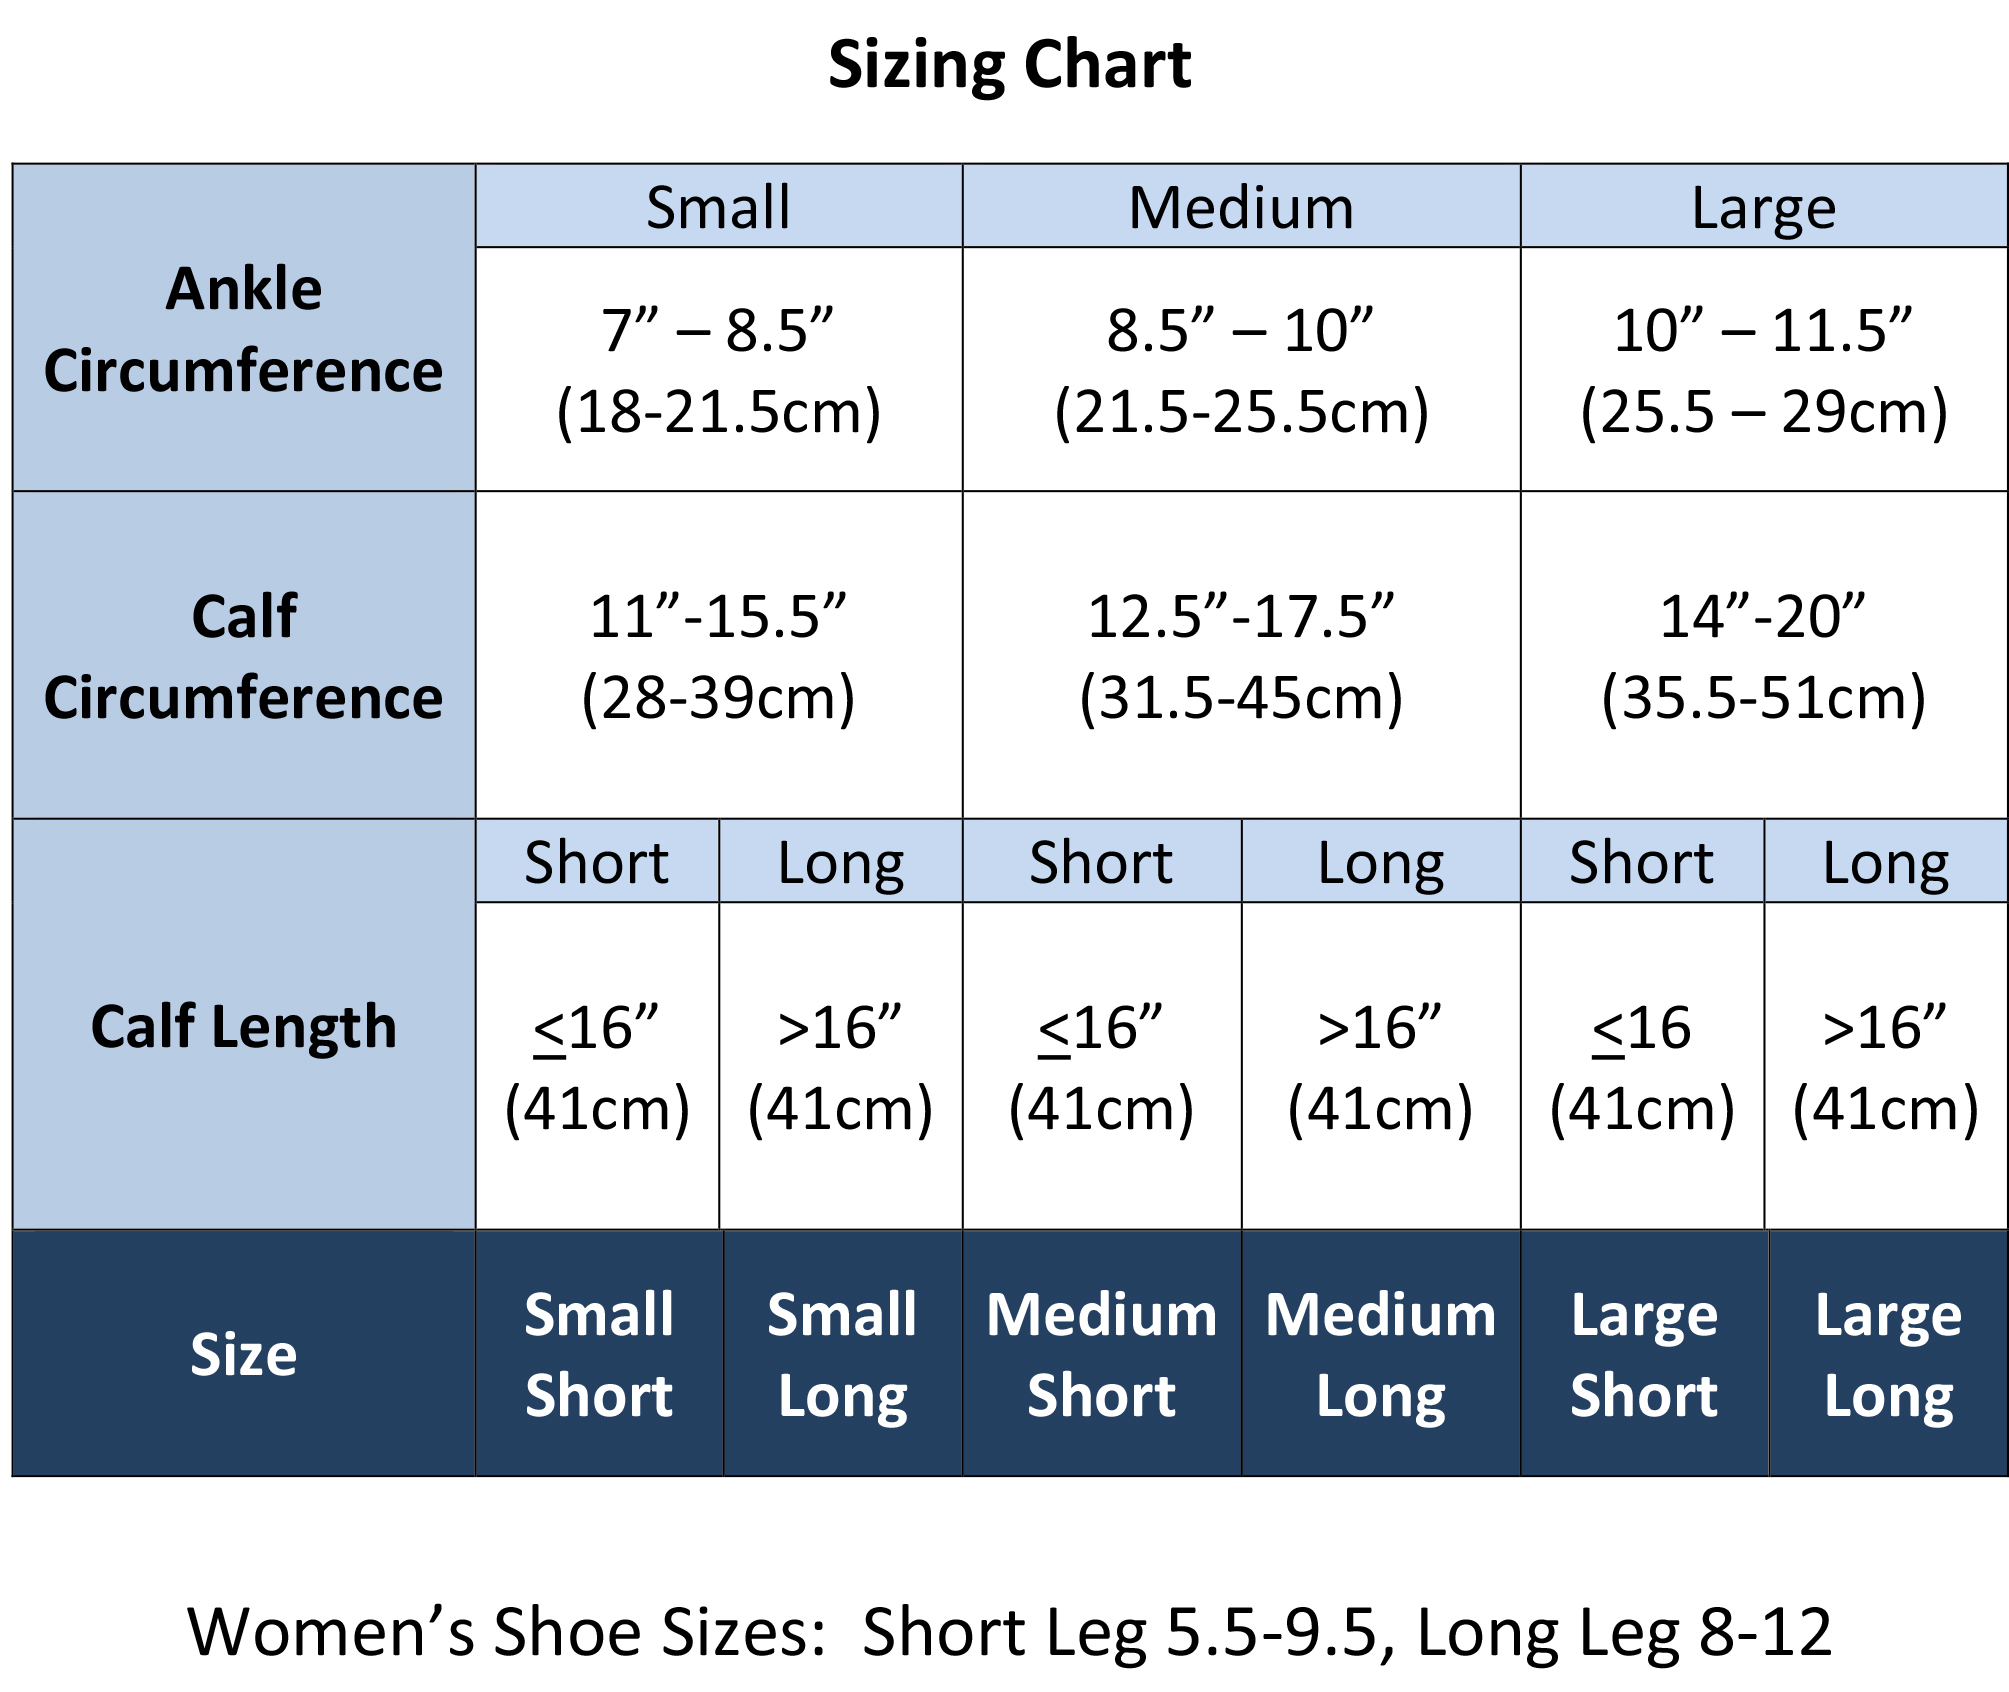 Compression socks for women size chart